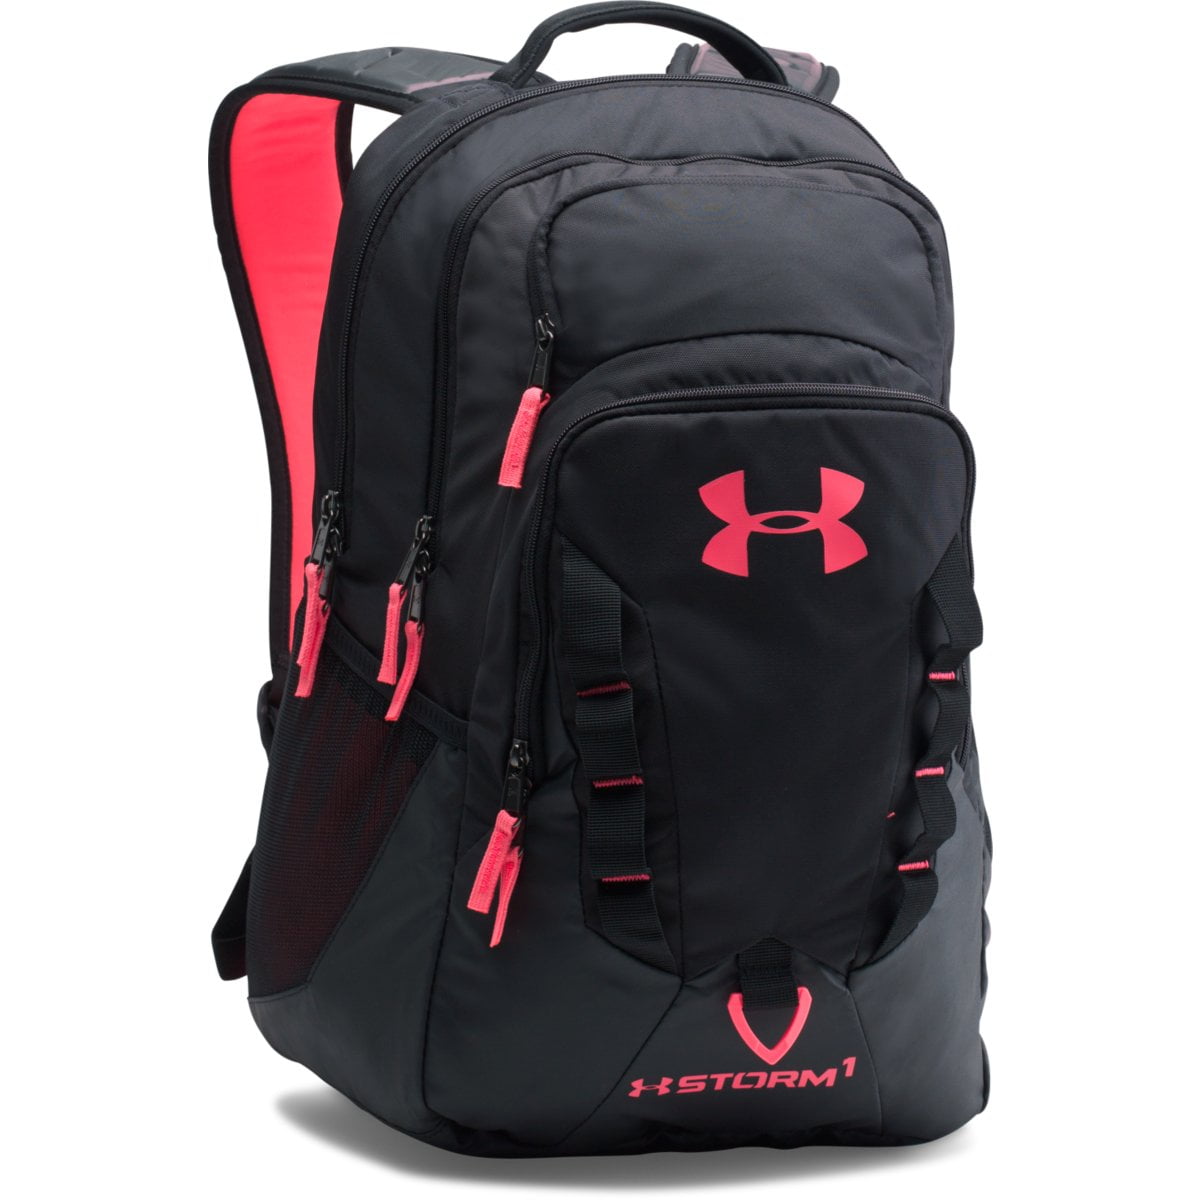 Under Armour Storm Recruit Backpack Black/Stealth -